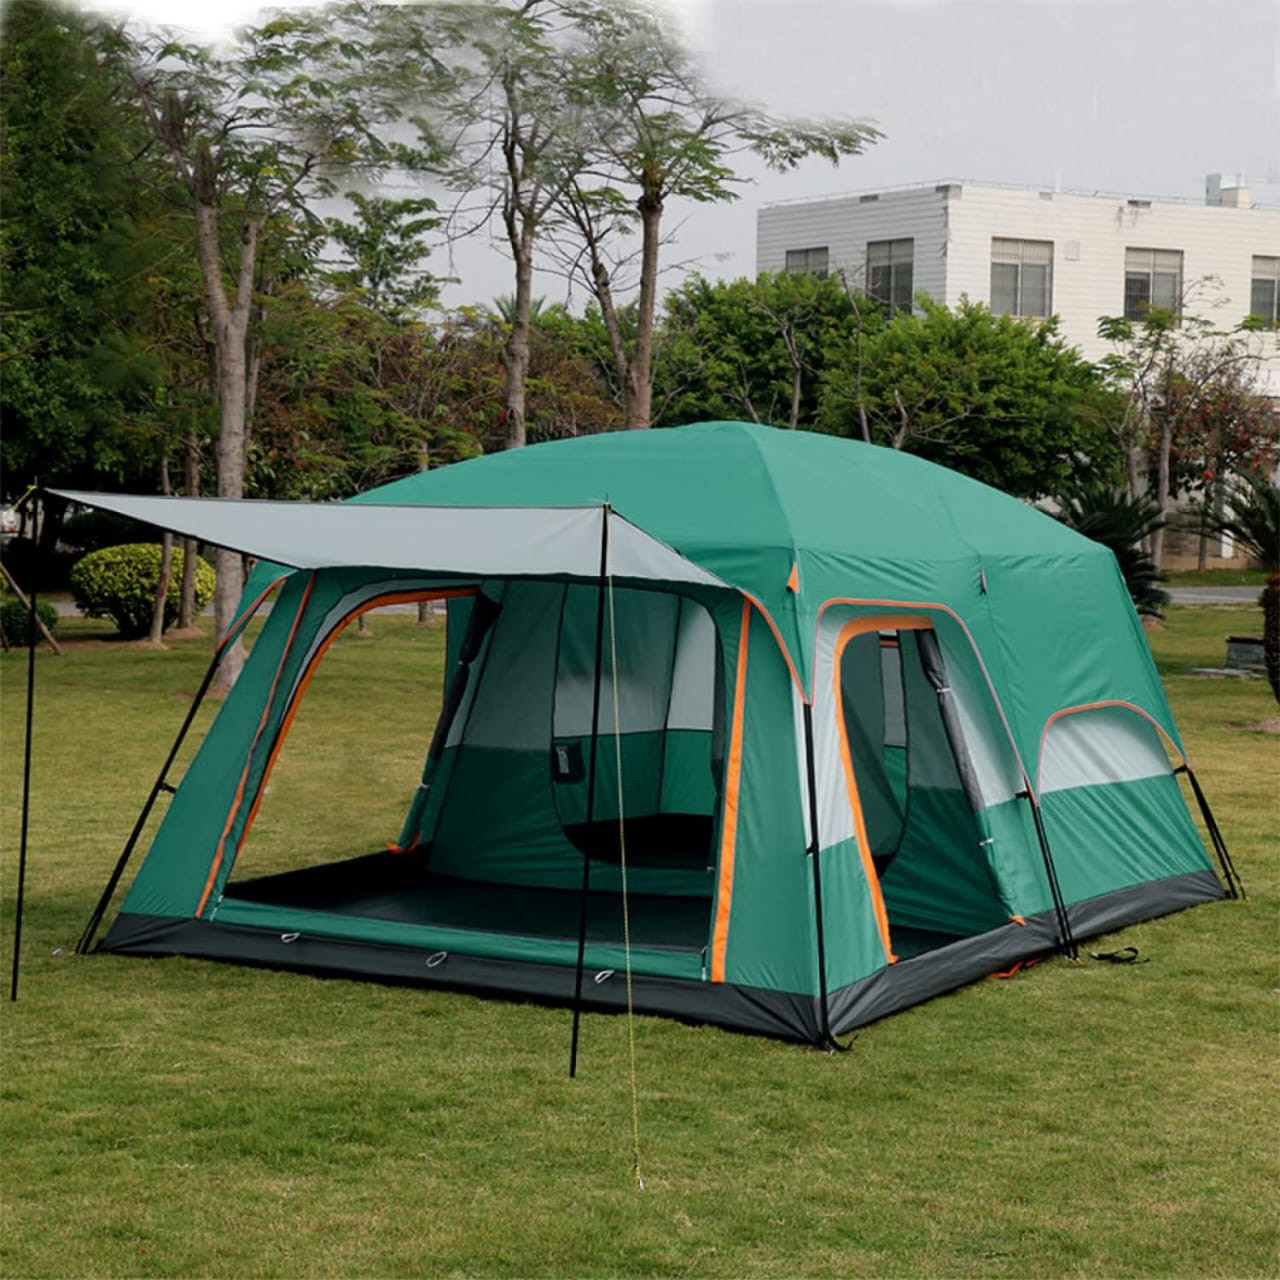 Extra Large Tent 10-12-14 Person(B),Family Cabin Tents,2 Rooms,3 Doors and 3 Windows with Mesh,Straight Wall,Waterproof,Double Layer,Big Tent for Outdoor,Picnic,Camping,Family Gathering